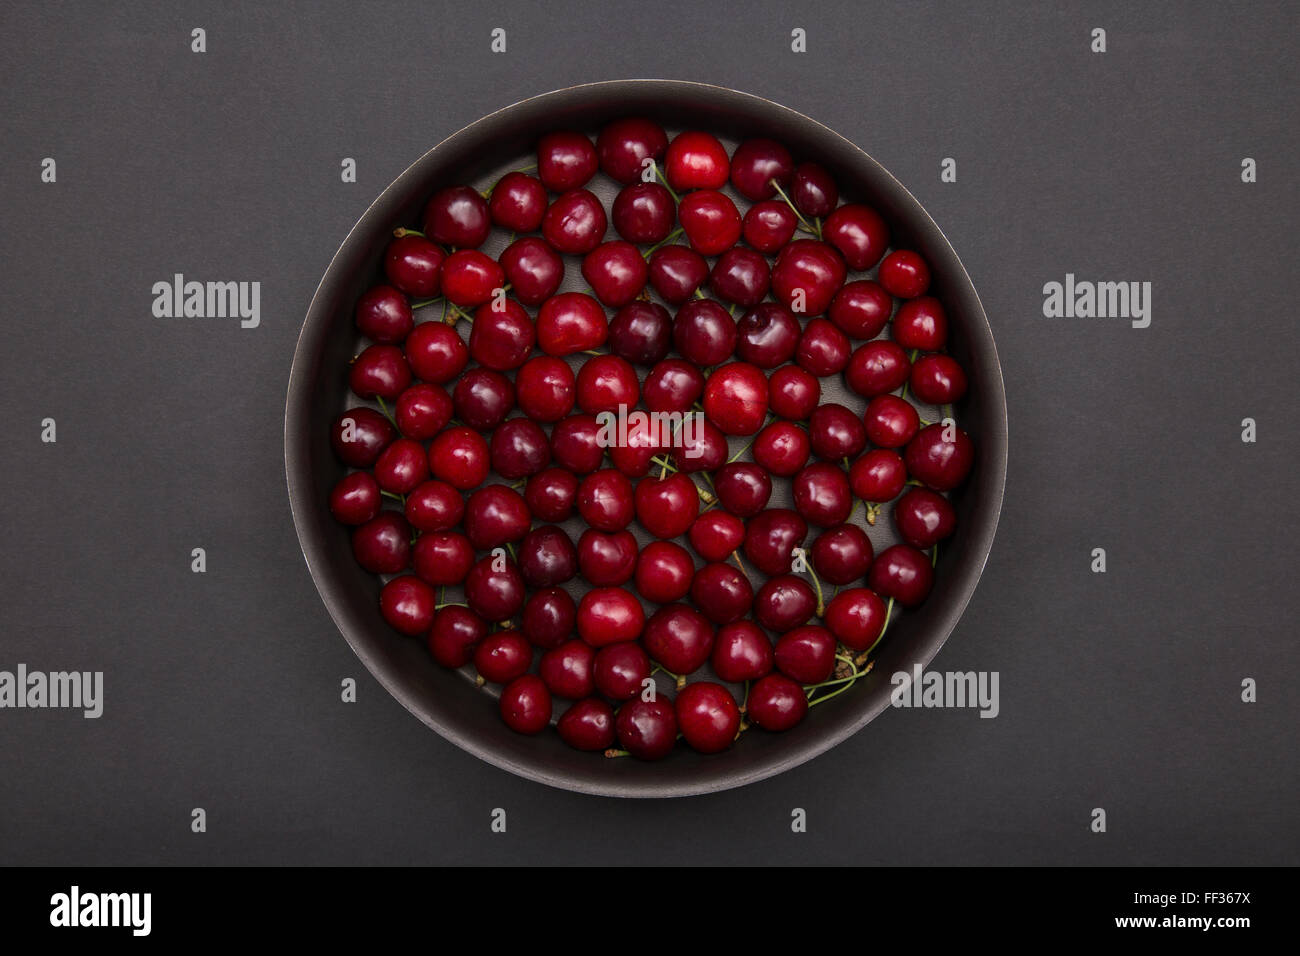 Top view of red cherries in round baking tin Stock Photo